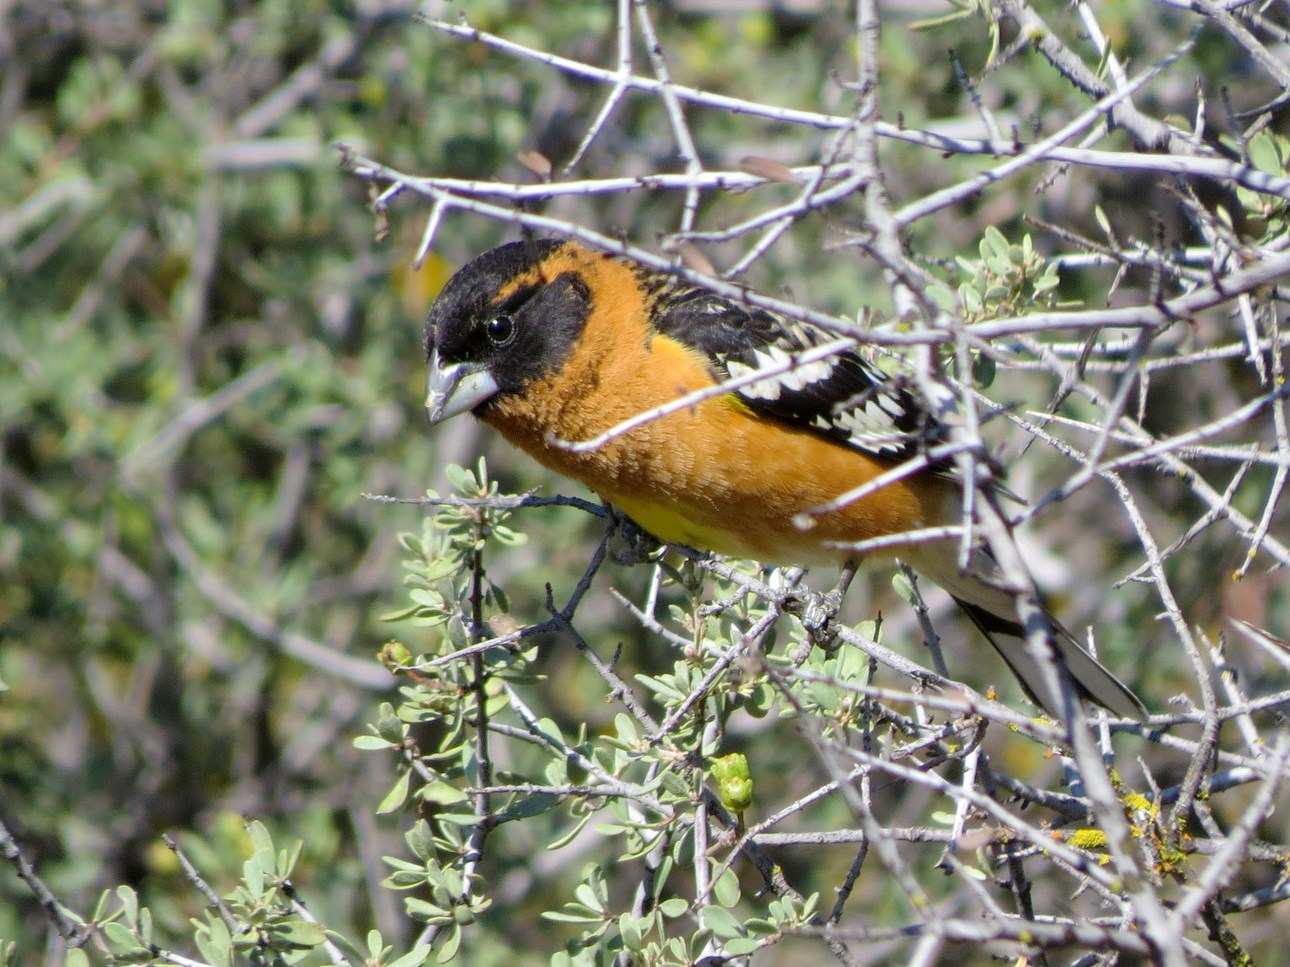 Bird with black head, deep orange breast, black-and-white wings, and a wide gray beak perched among a tangle of slender branches.